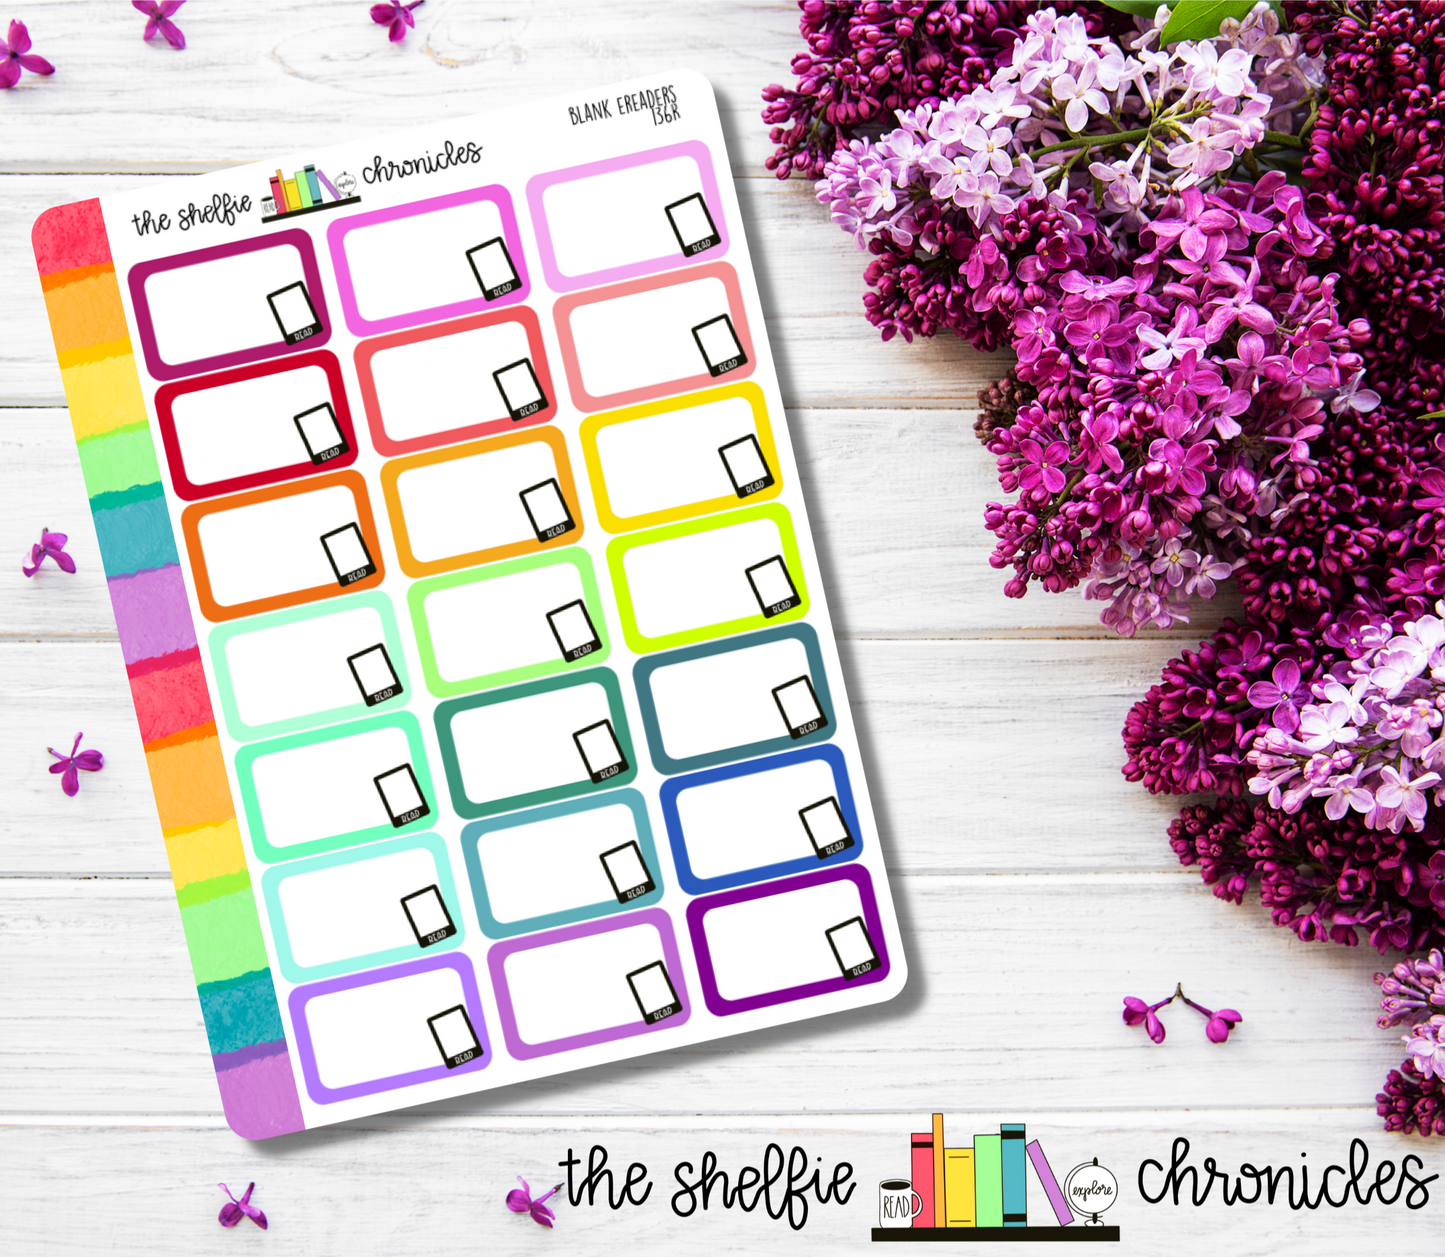 136 - Blank Ereaders - Choose Your Color - Half Box Die Cut Stickers - Repositionable Paper - Great For Planners And Reading Journals